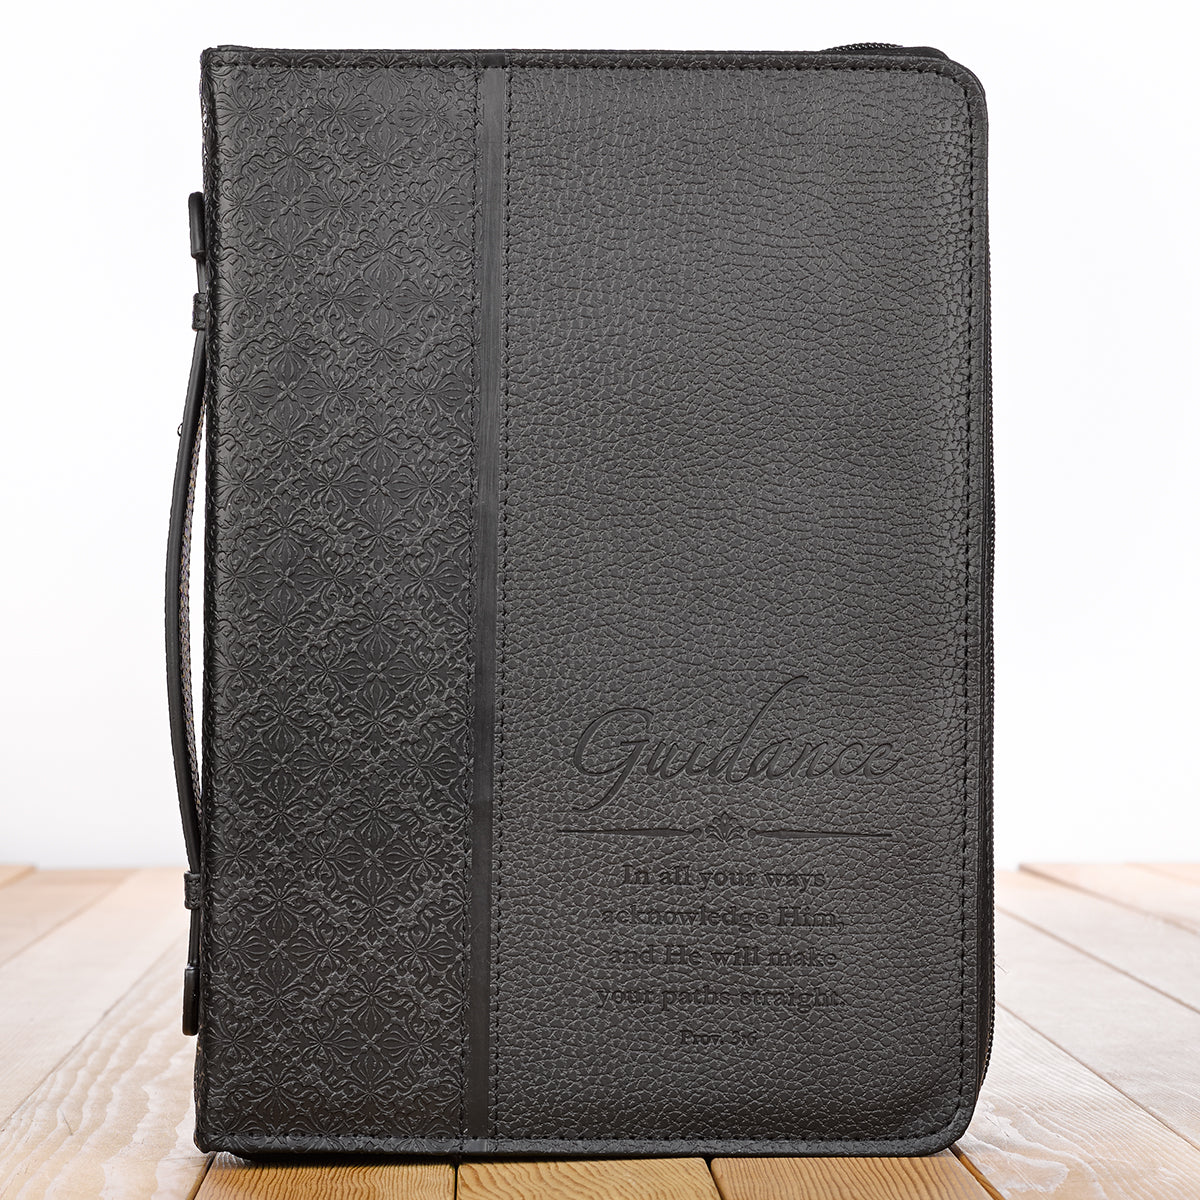 Guidance Black Faux Leather Classic Bible Cover - Proverbs 3:6 - The Christian Gift Company